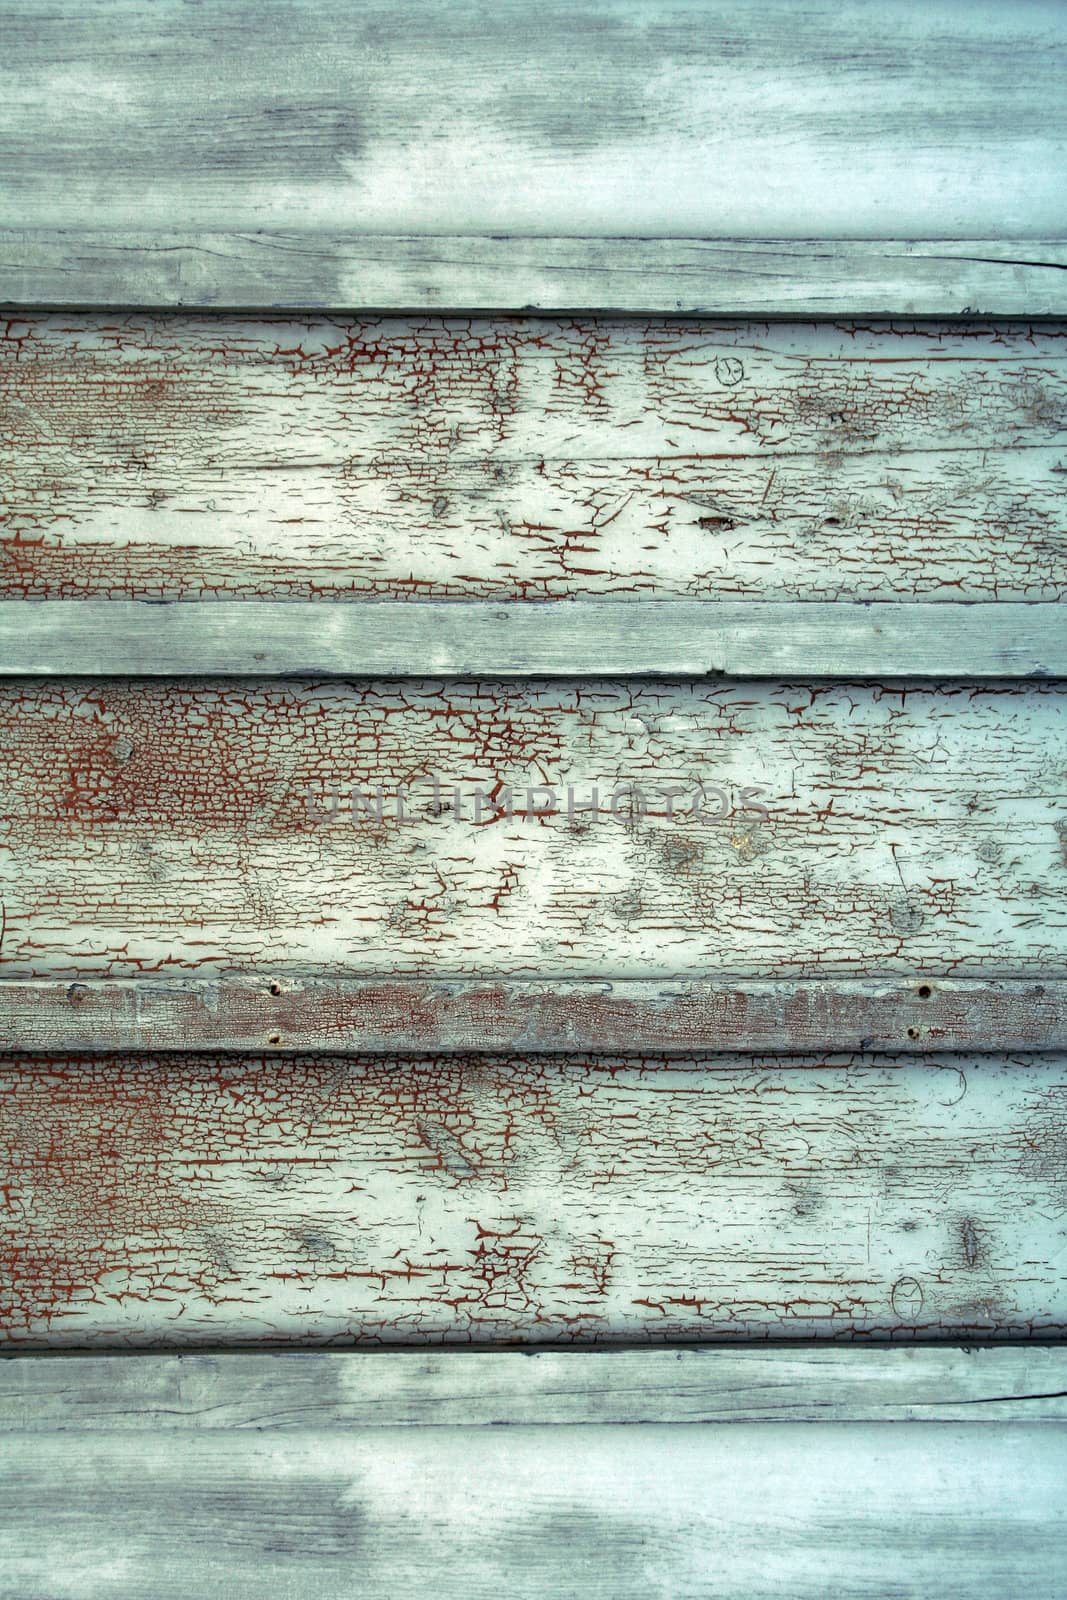 planks and boards of an old wooden house